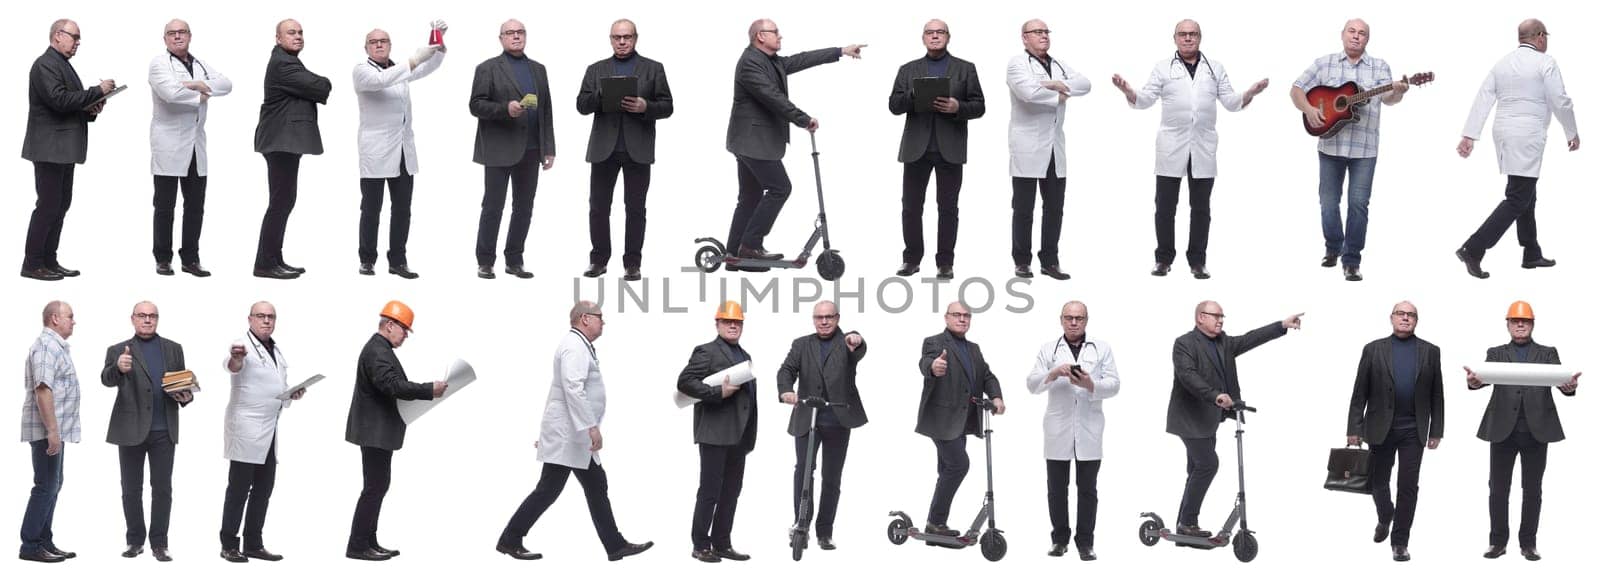 collage of a man in full growth displaying many professions and position by asdf